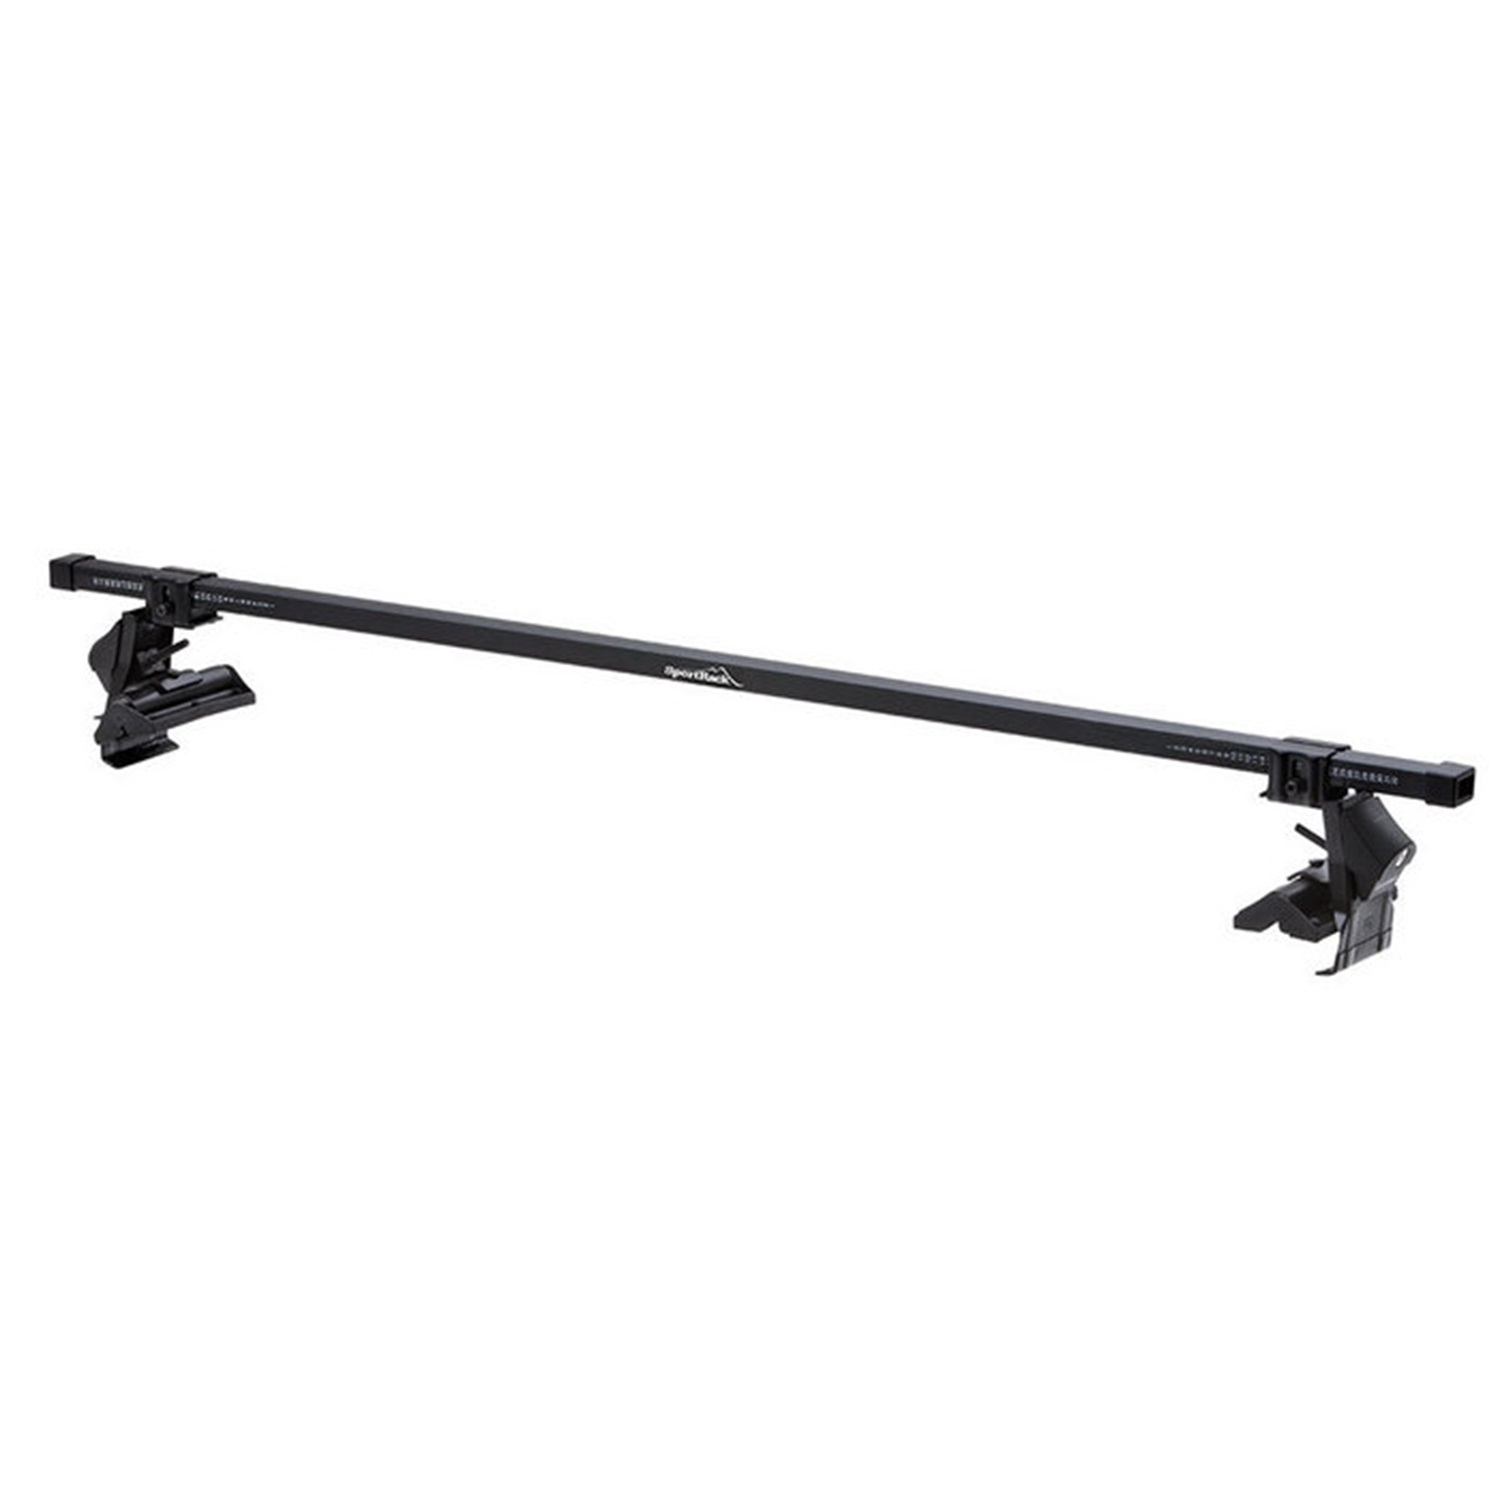 Thule Thule SR1005 SportRack Complete Roof Rack System Fits 01-04 Tacoma